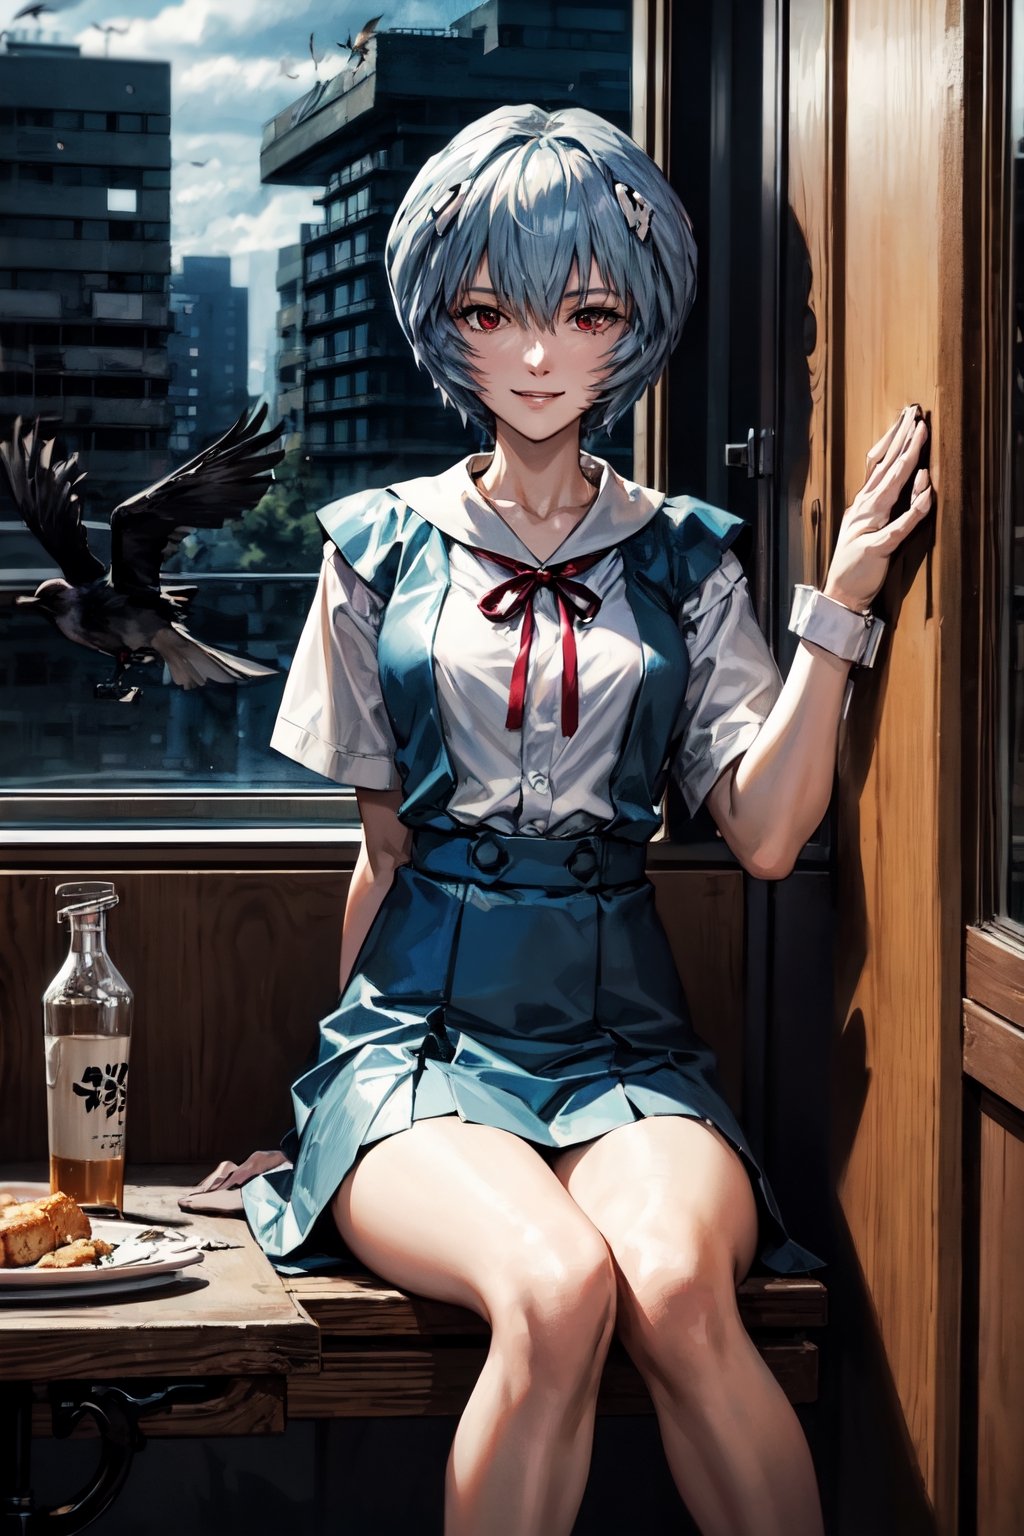 Rei ayanami, facial portrait, sexy stare, smirked, sitting on a chair, inside crummy apartment, looking outside, cloudy sky, birds flying, 